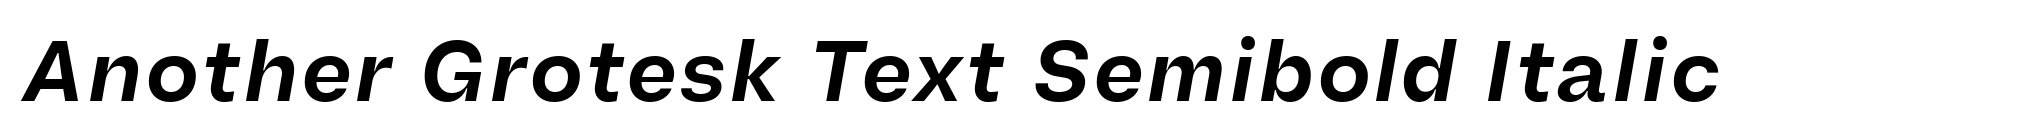 Another Grotesk Text Semibold Italic image